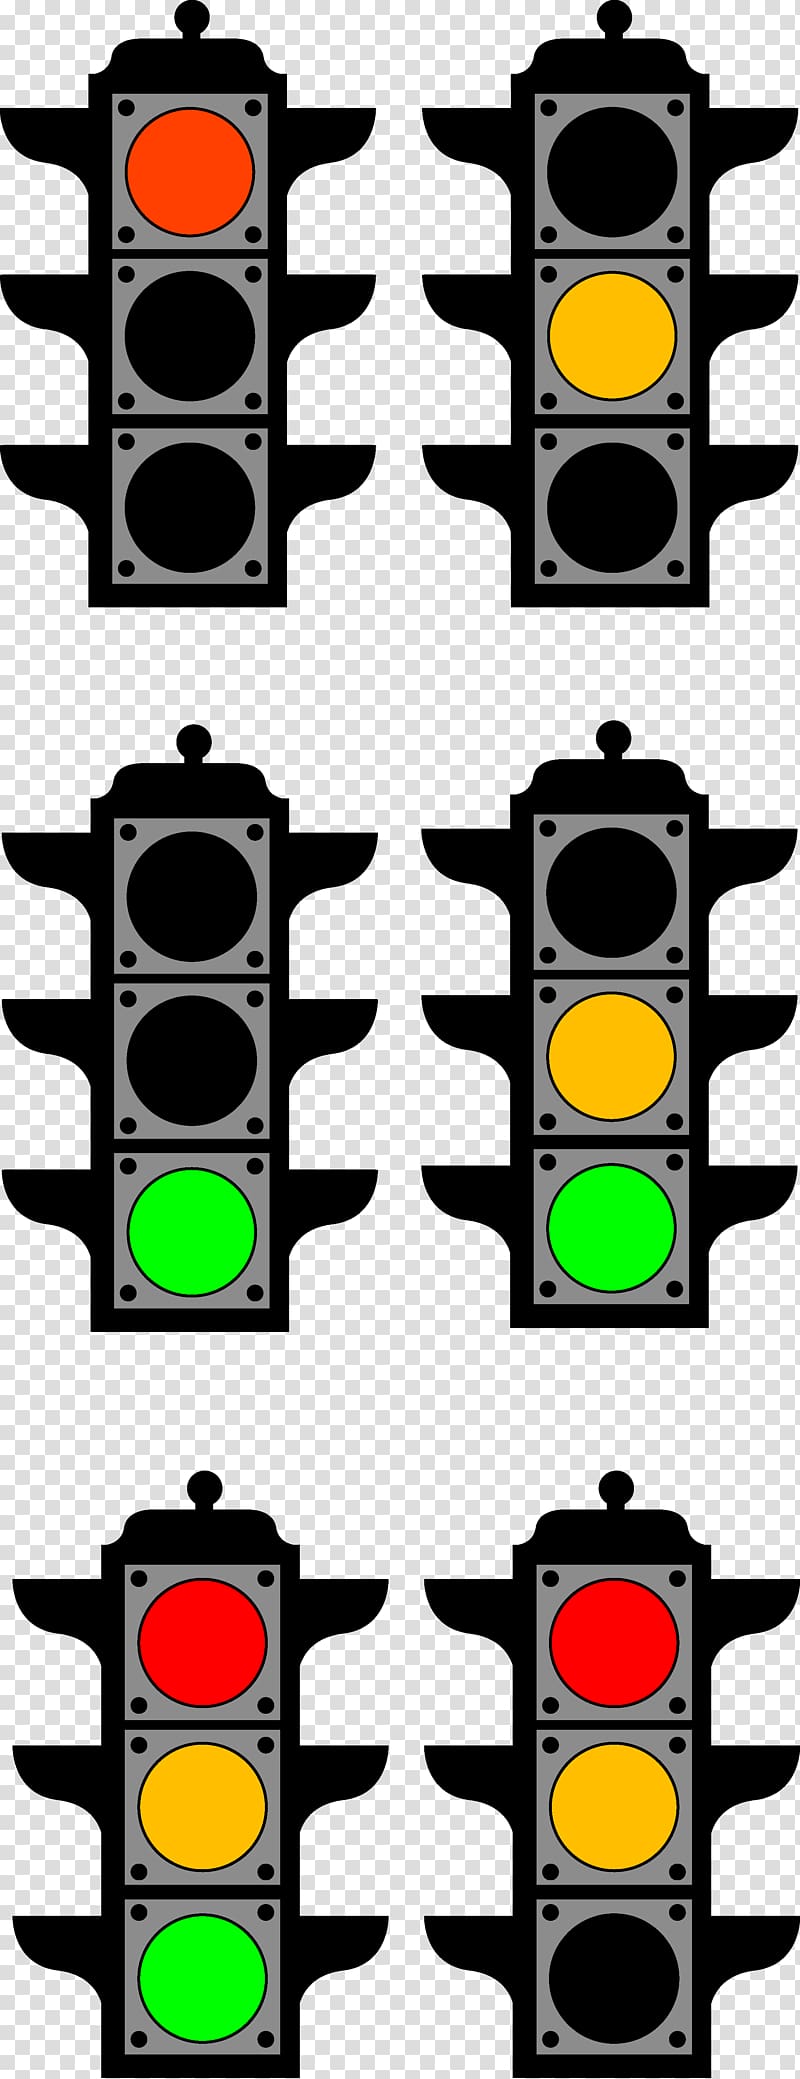 Traffic sign Traffic light, traffic light transparent background PNG clipart